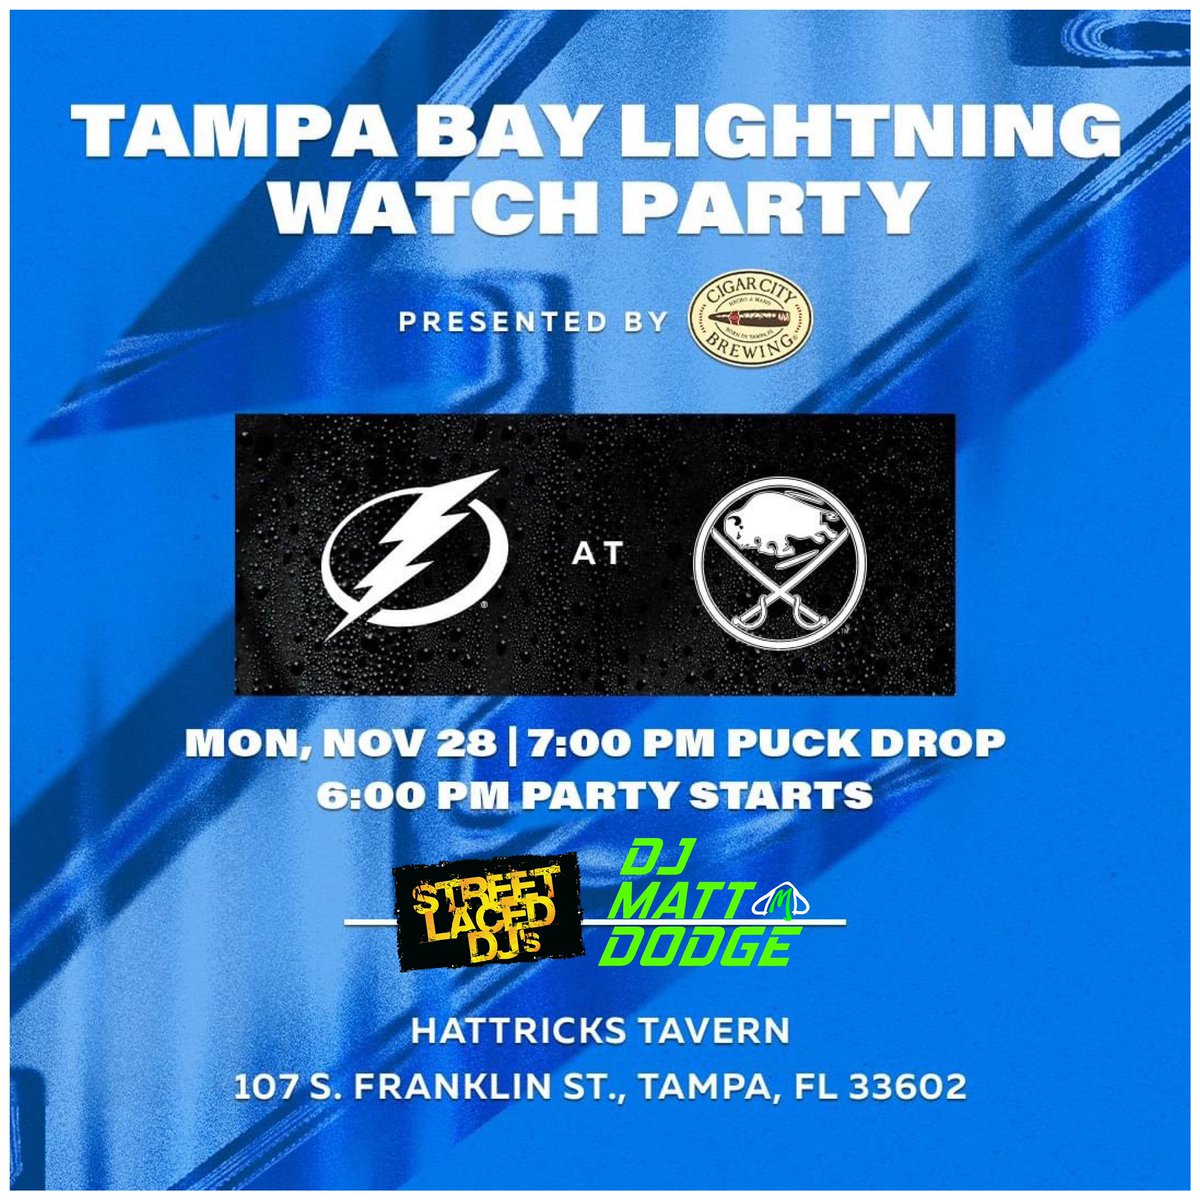 #BoltsNation! We hope to see YOU tonight for the official @TBLightning WATCH PARTY at @HattricksTavern in @Tampasdowntown! @DJMattDodge on party vibes, @ThunderBugTBL, #BoltsBlueCrew, @TBLRollingTHNDR, autographed giveaways, specials & more! Bolts battle @BuffaloSabres! #GoBolts